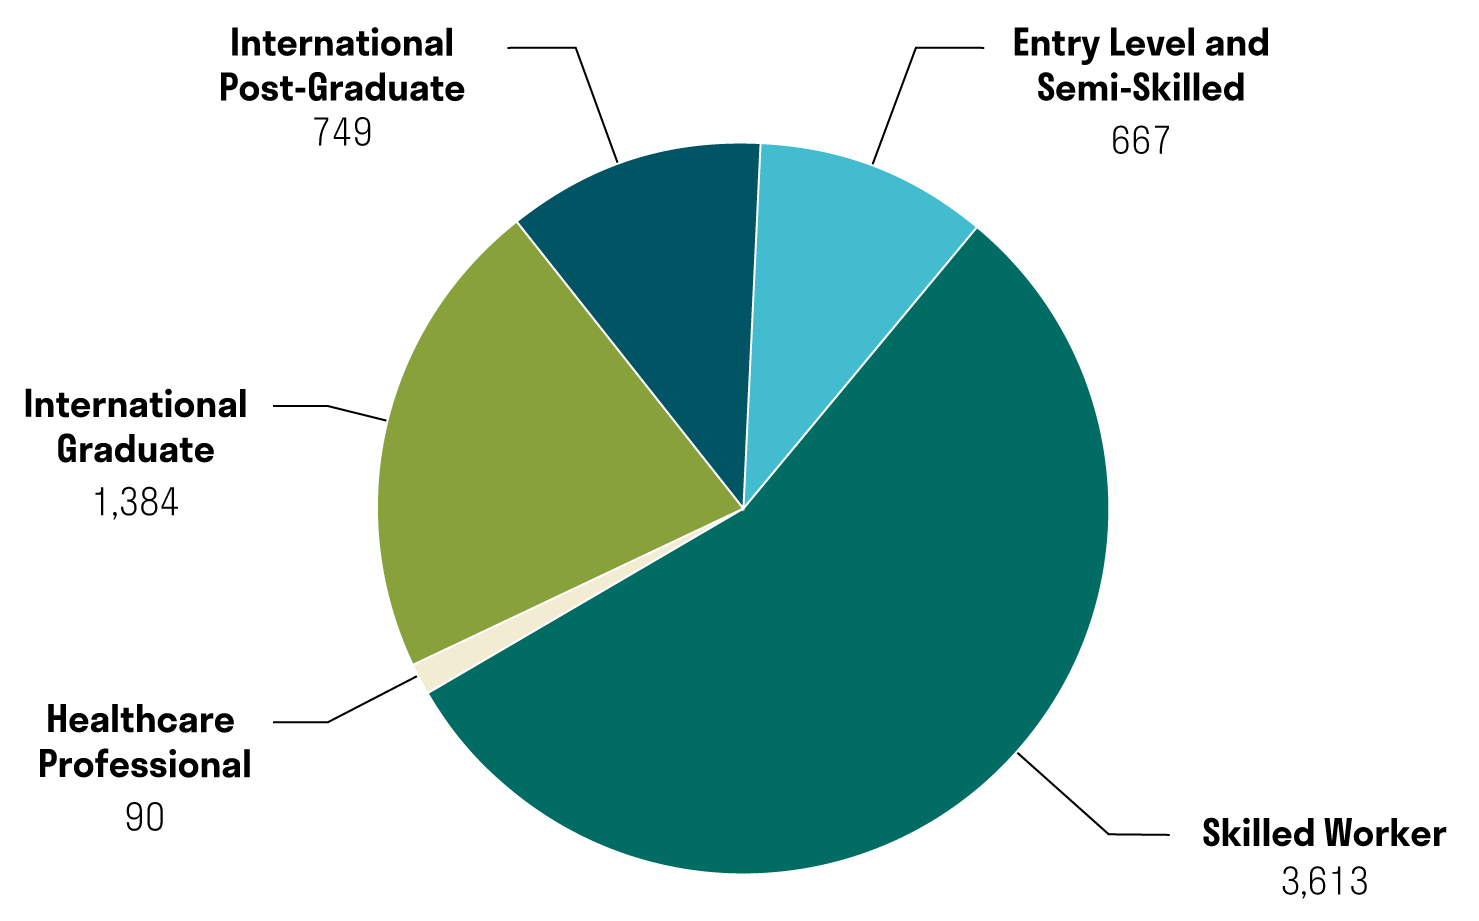 B.C. provincial nominees by category: Healthcare Professional (90), International Graduate (1384), International Post-Graduate (749), Entry Level and Semi-Skilled (667), and Skilled Worker (3613)